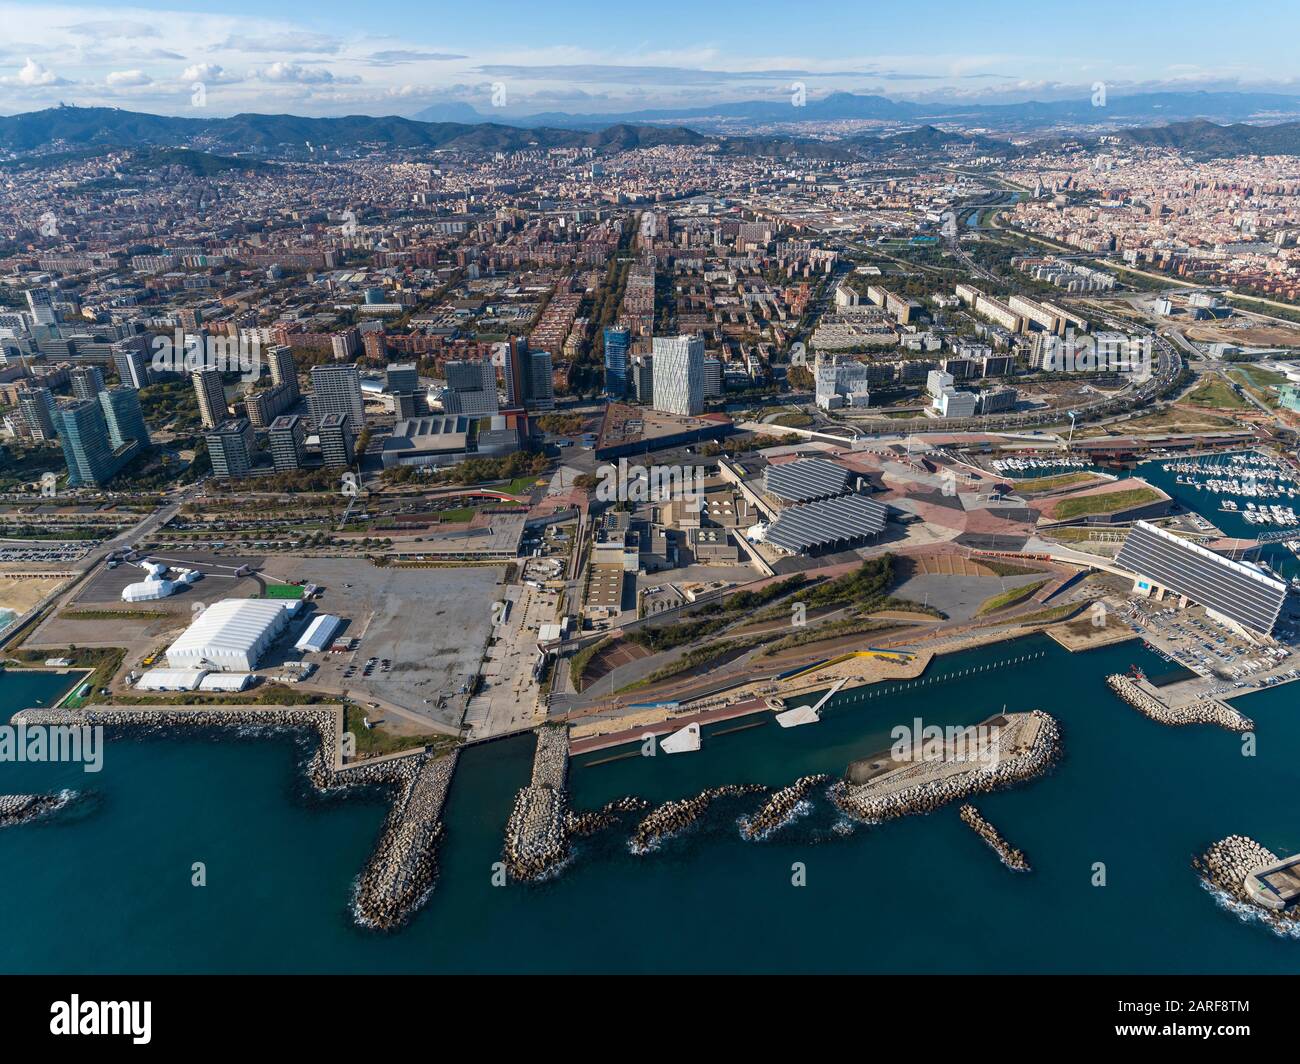 Aerial view of Forum area and Barcelona, Spain. Stock Photo